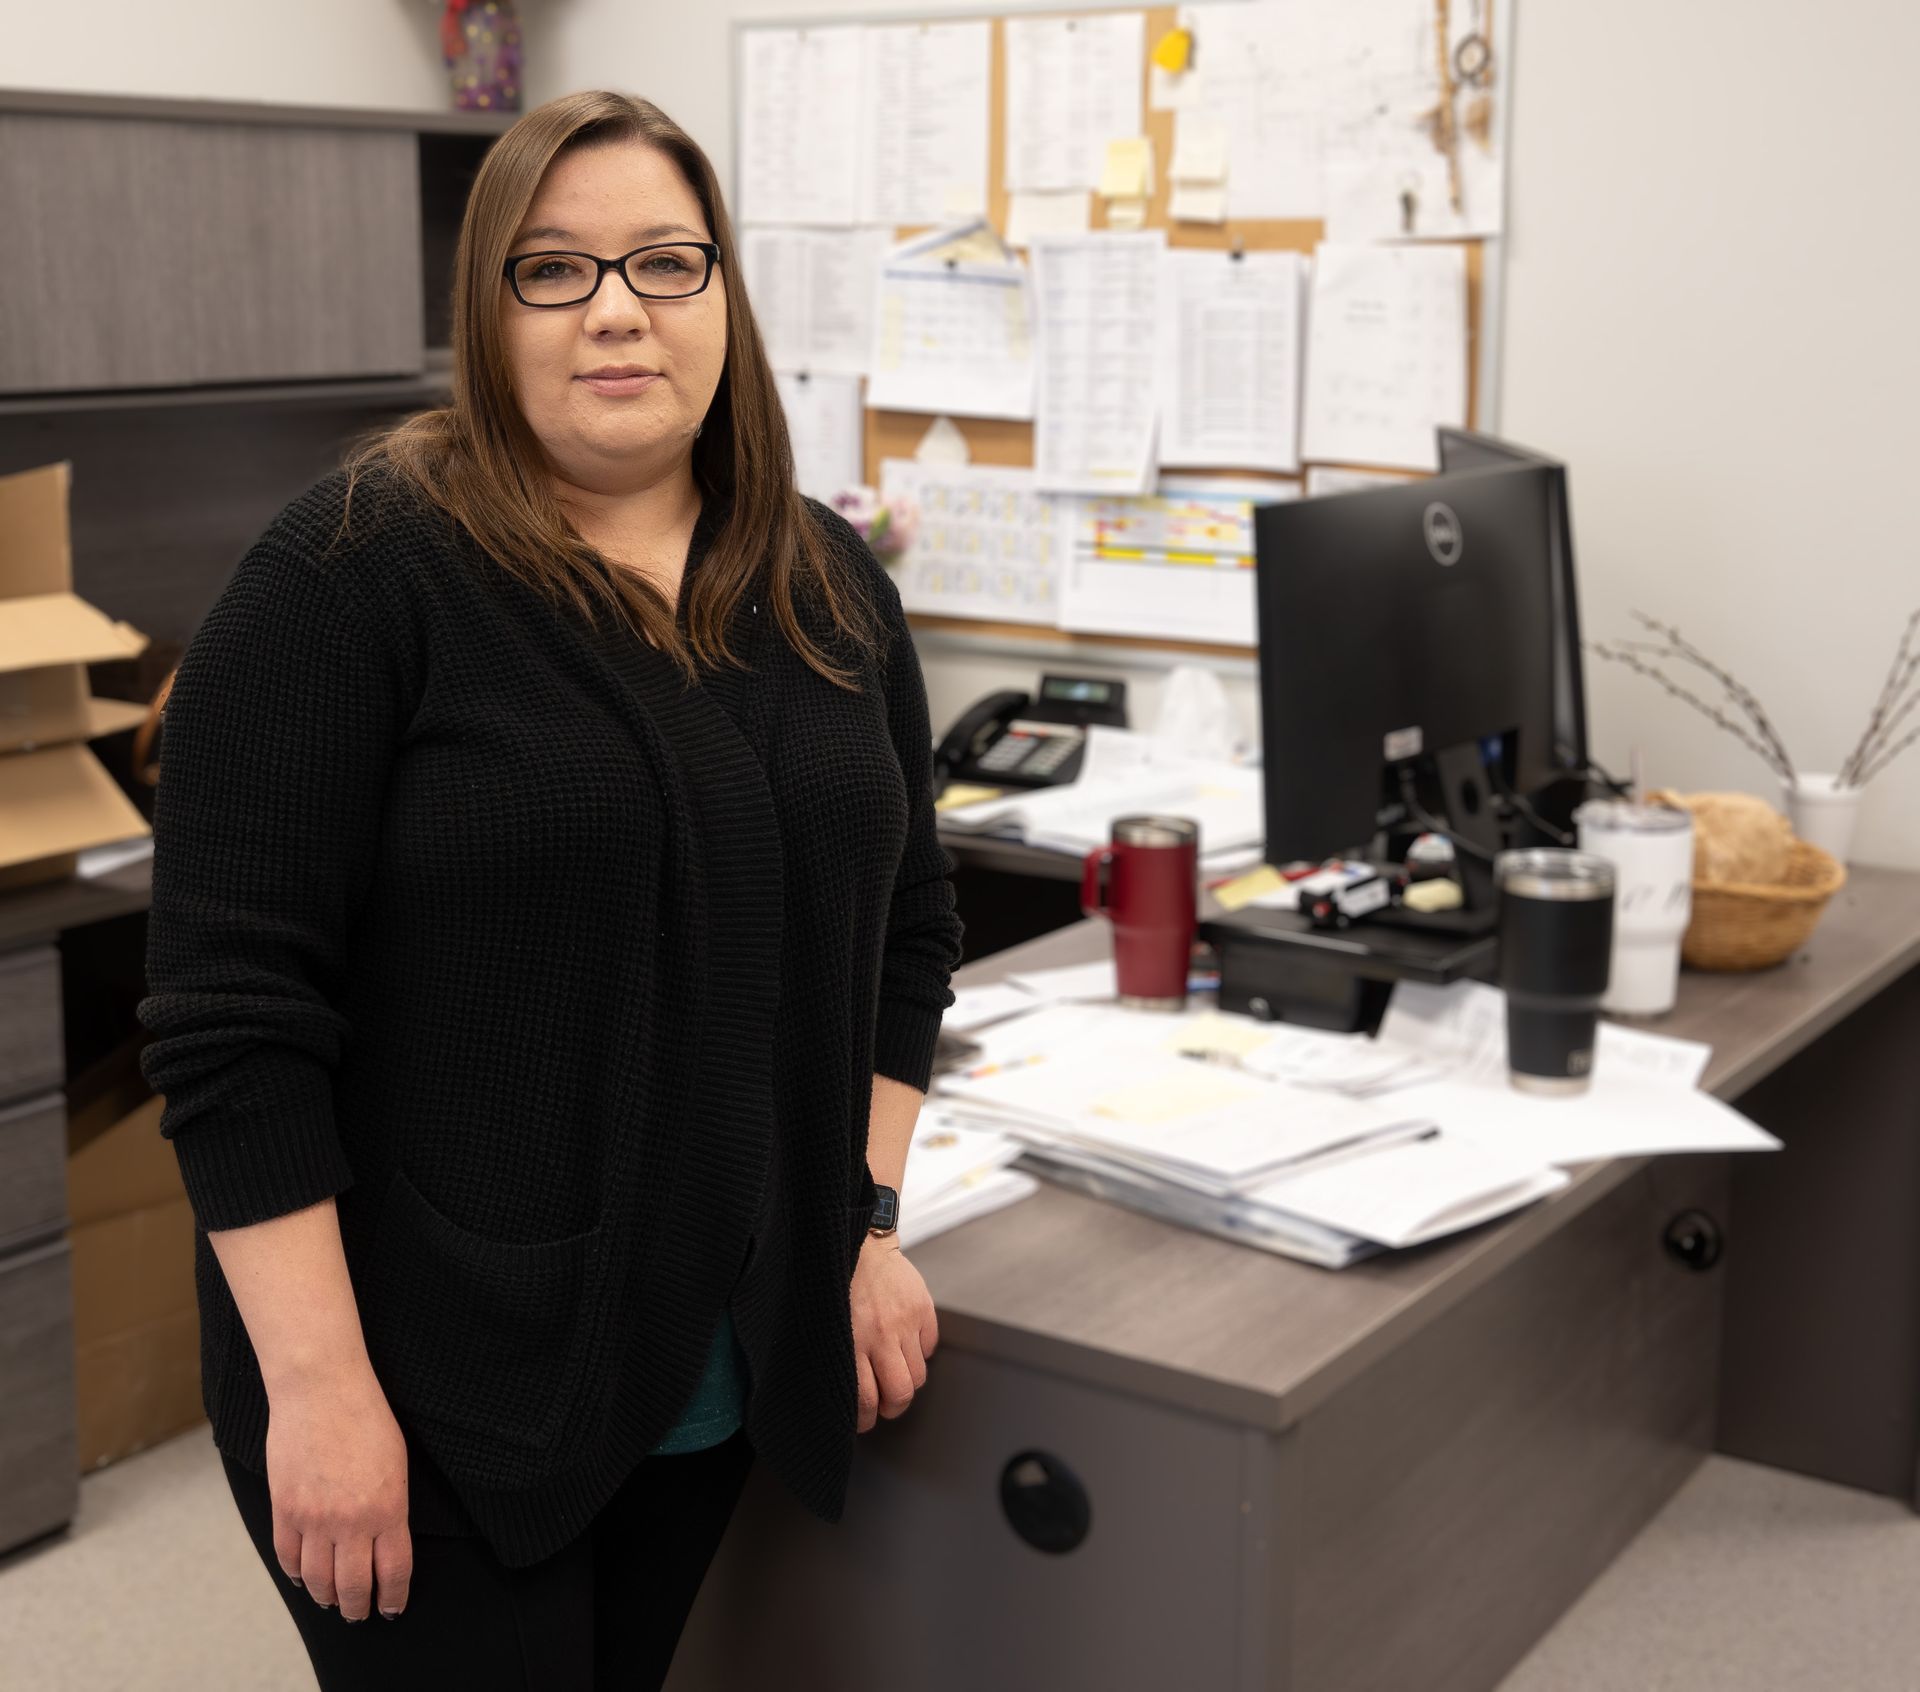 MFNPS-Manitoba First Nations Police Service - Criminal Records staff